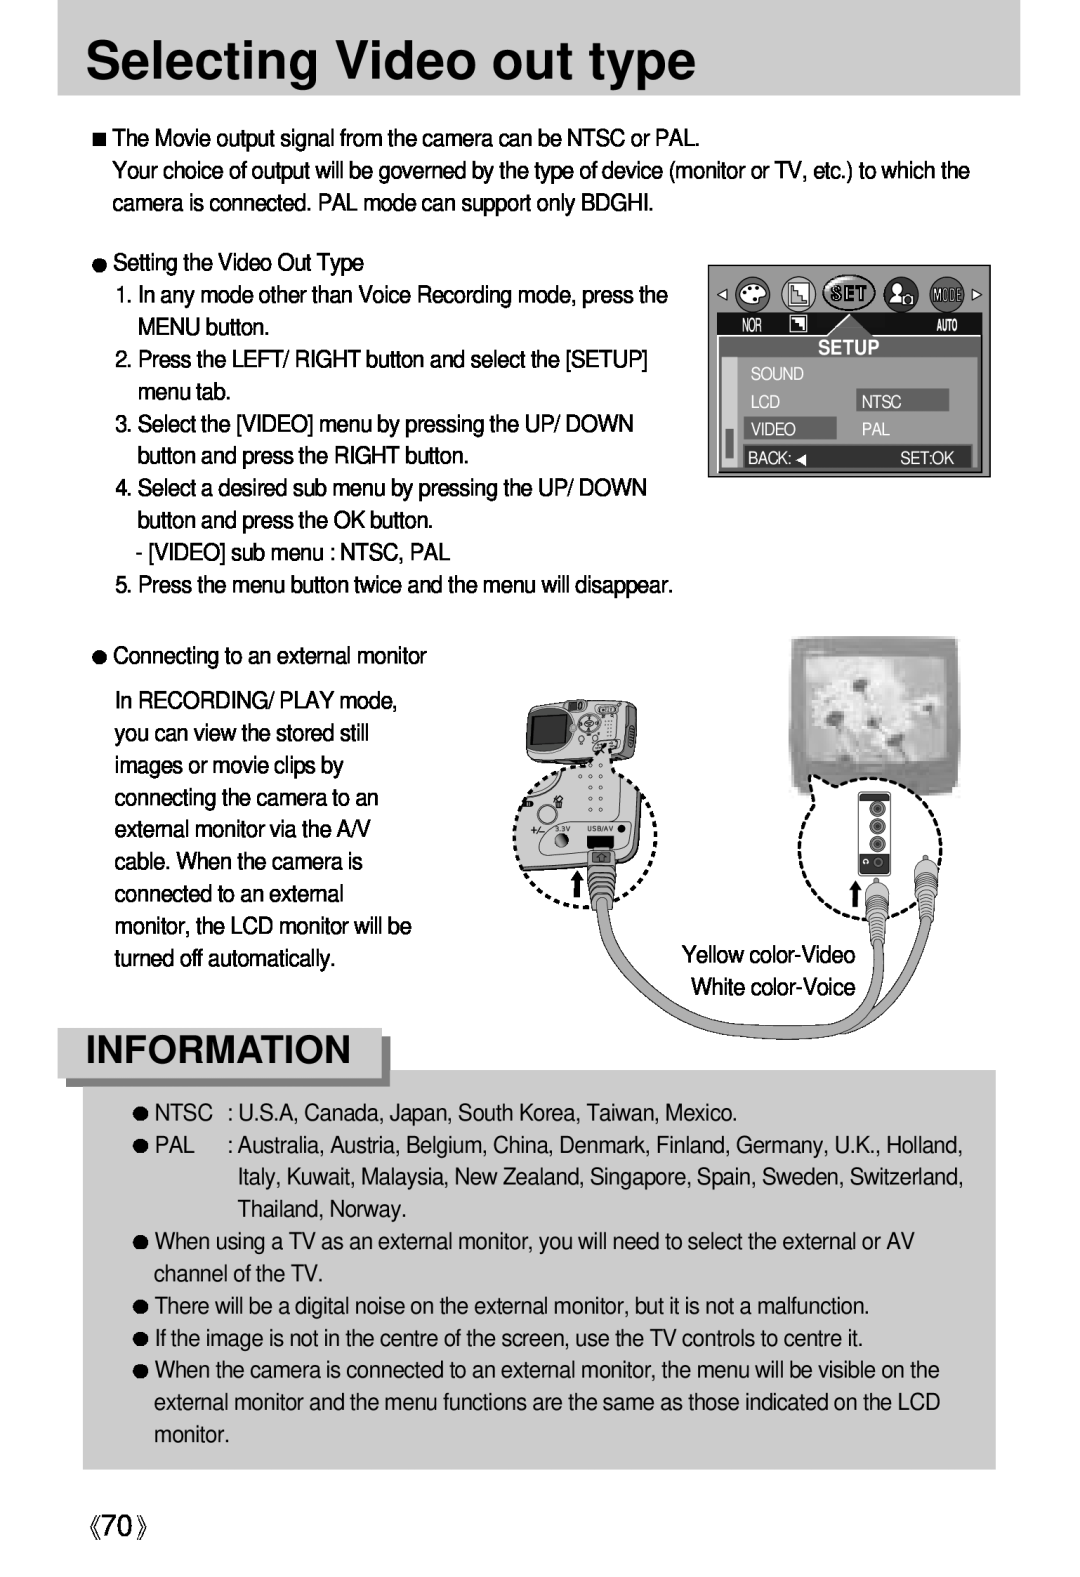 Samsung Digimax U-CA user manual Selecting Video out type, Information 